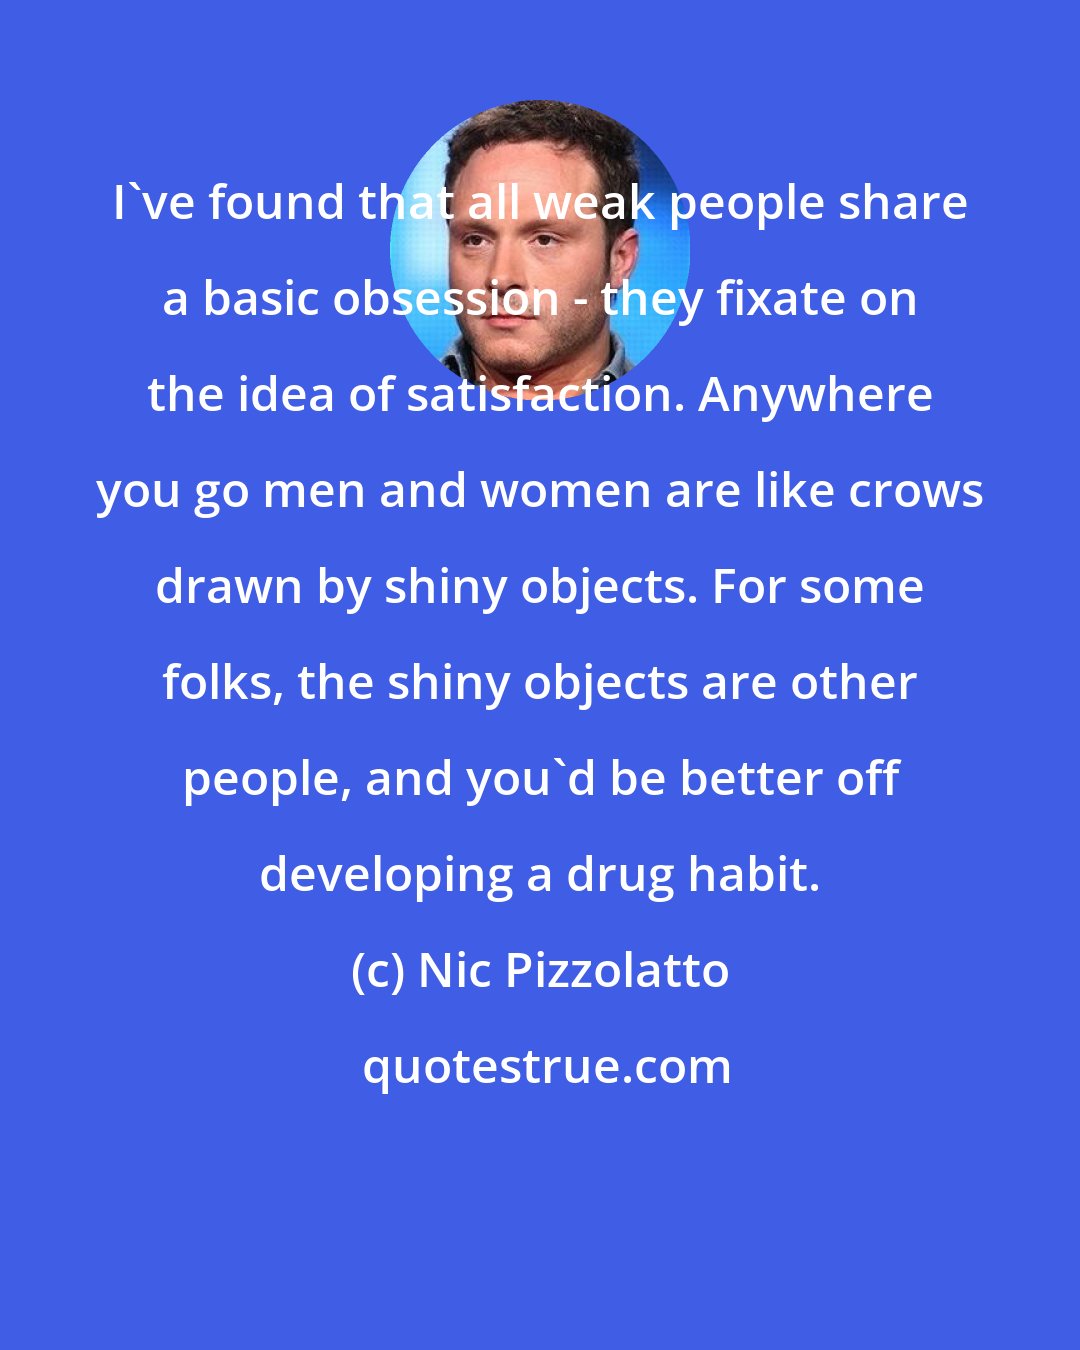 Nic Pizzolatto: I've found that all weak people share a basic obsession - they fixate on the idea of satisfaction. Anywhere you go men and women are like crows drawn by shiny objects. For some folks, the shiny objects are other people, and you'd be better off developing a drug habit.